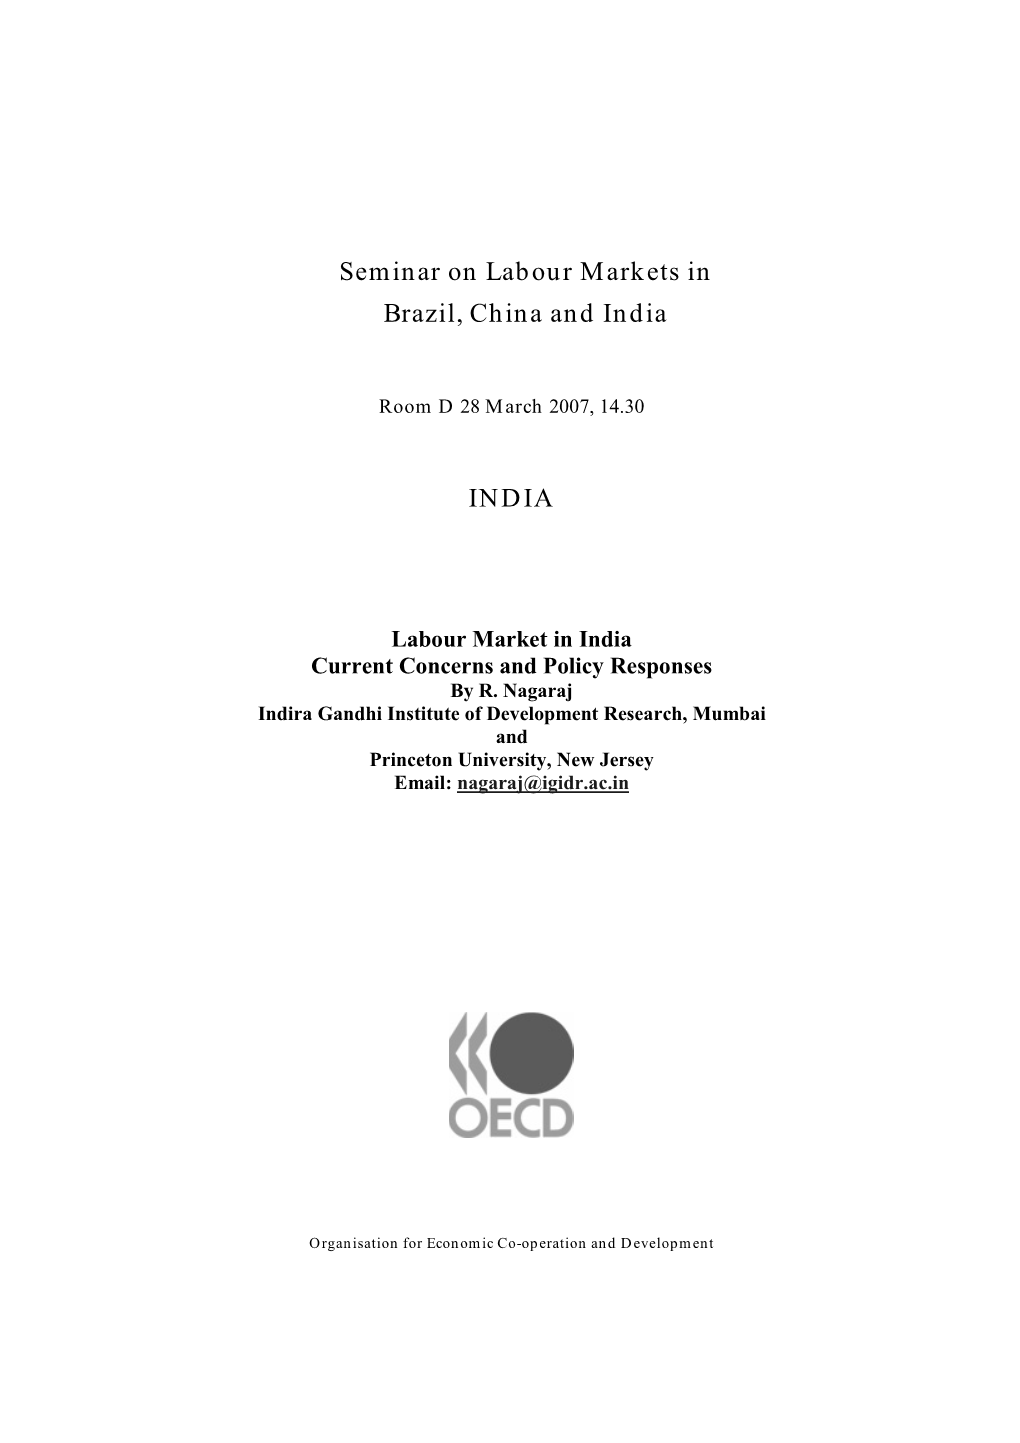 Seminar on Labour Markets in Brazil, China and India